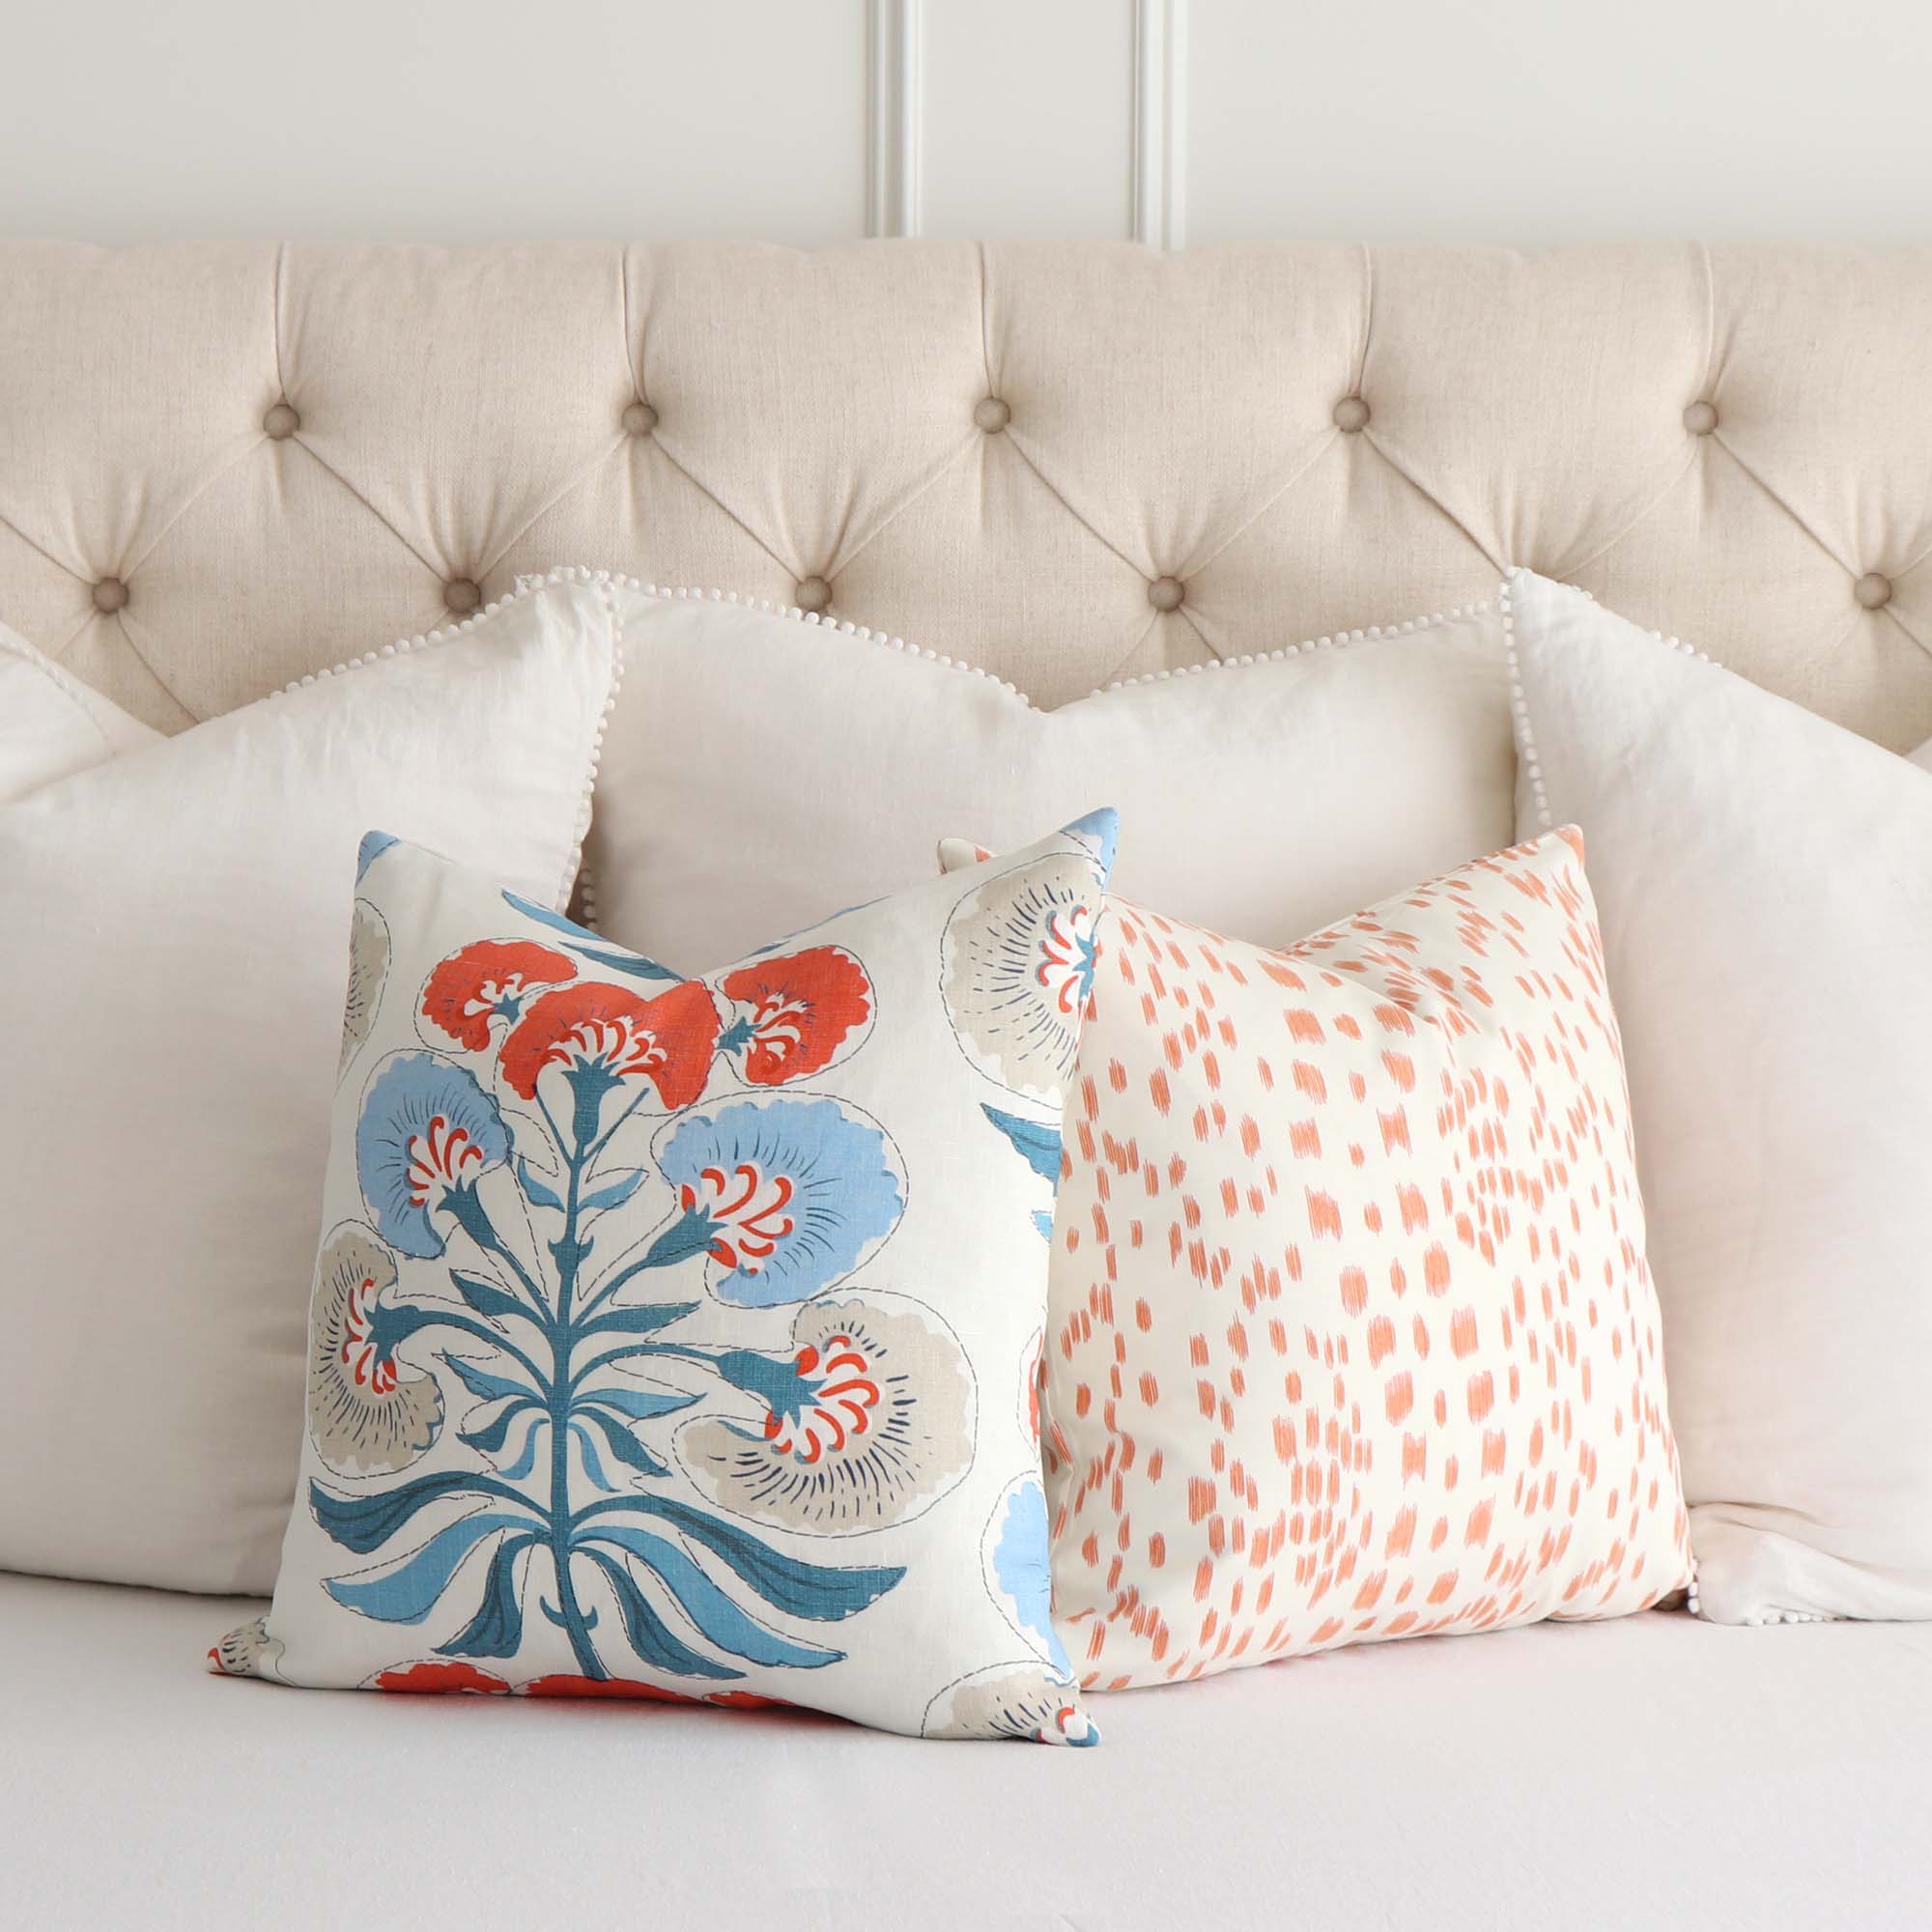 Thibaut Tybee Tree French Blue Coral Orange Floral Block Print Designer Linen Decorative Throw Pillow Cover with Matching Throw Pillow